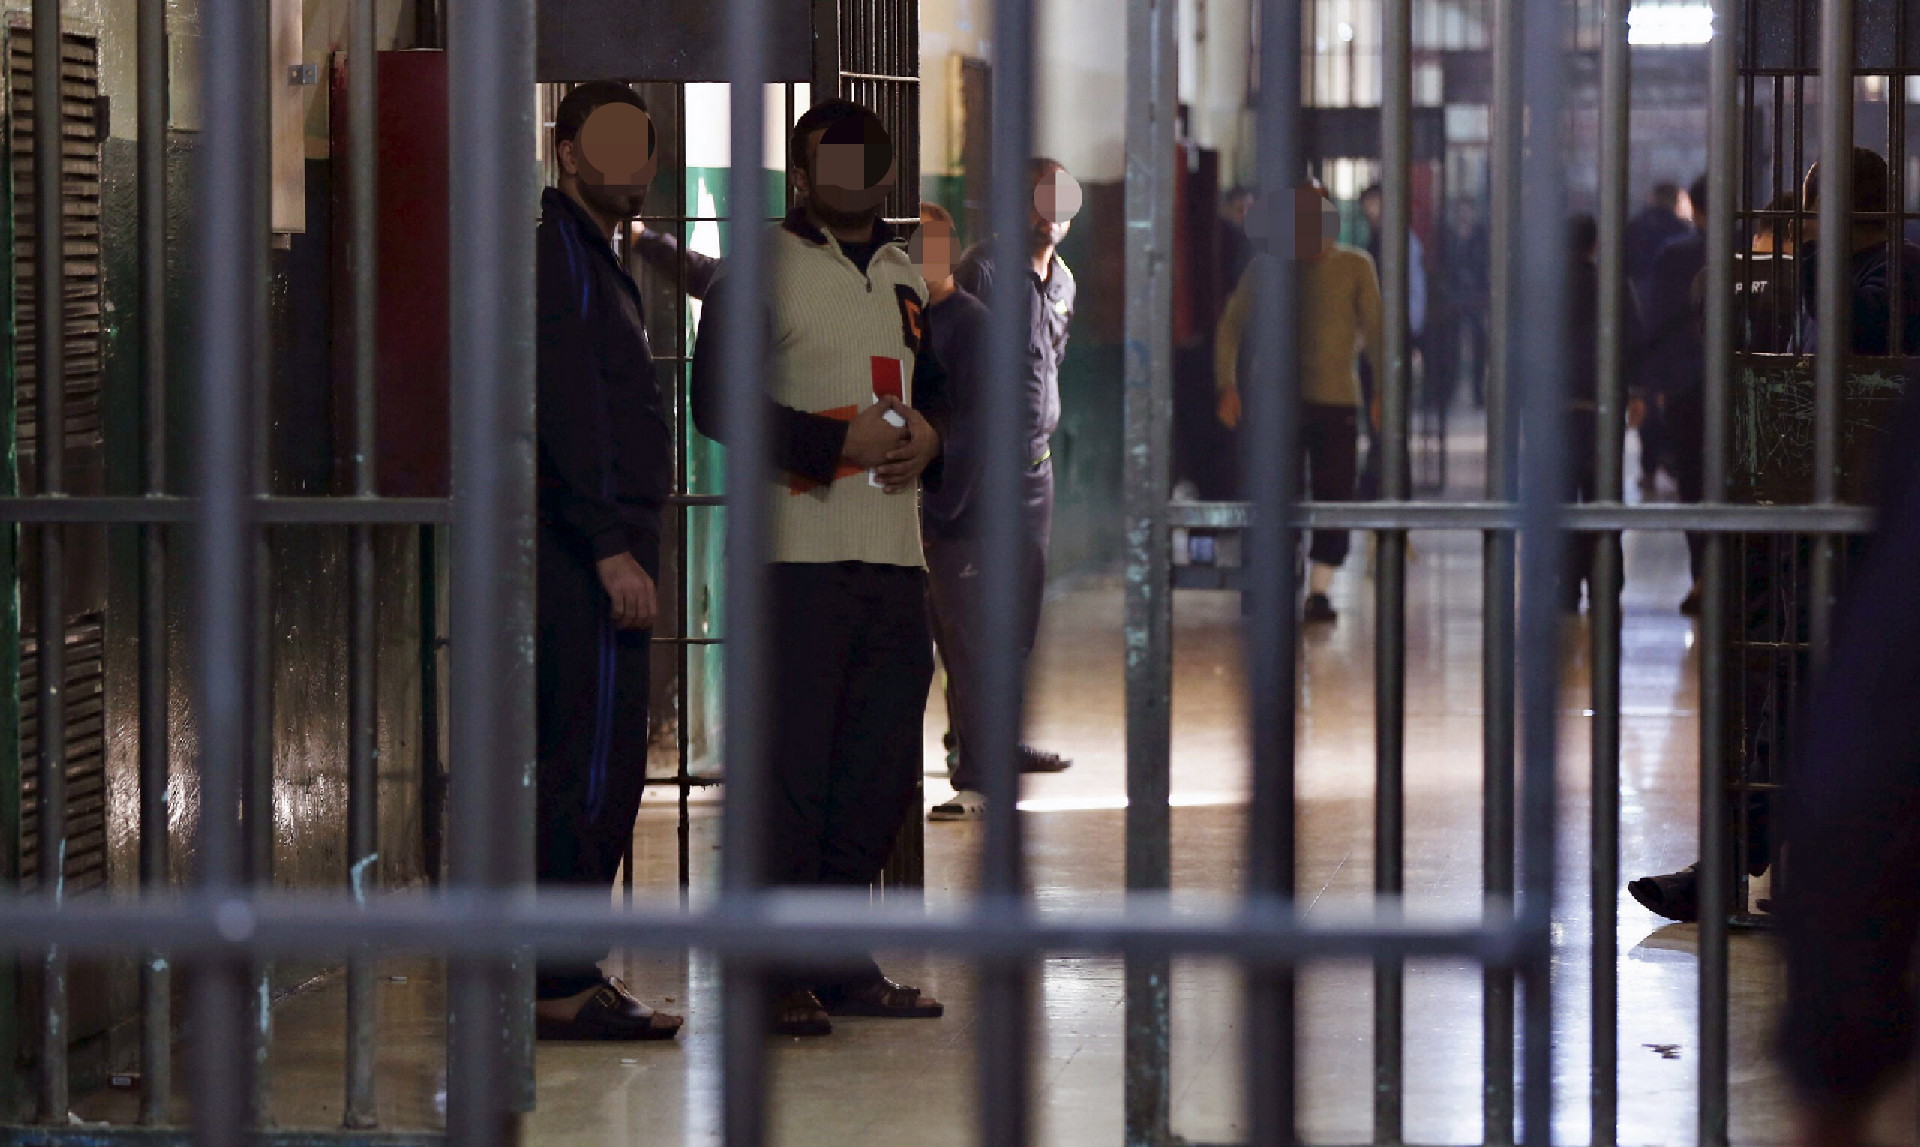 Prisoners seen at Swaqa Correction and Rehabilitation Center, near the city of Karak, November 30, 2015. Prison officials at Swaqa say that the center has one of the world's best success rates in decreasing repeat offenses. Only seven percent of prisoners, who undergo training and participate in qualification courses for two years at Swaqa, commit a second crime, according to the center's director Colonel Talal Al-Alabdallat. Picture taken November 30, 2015. REUTERS/Muhammad Hamed